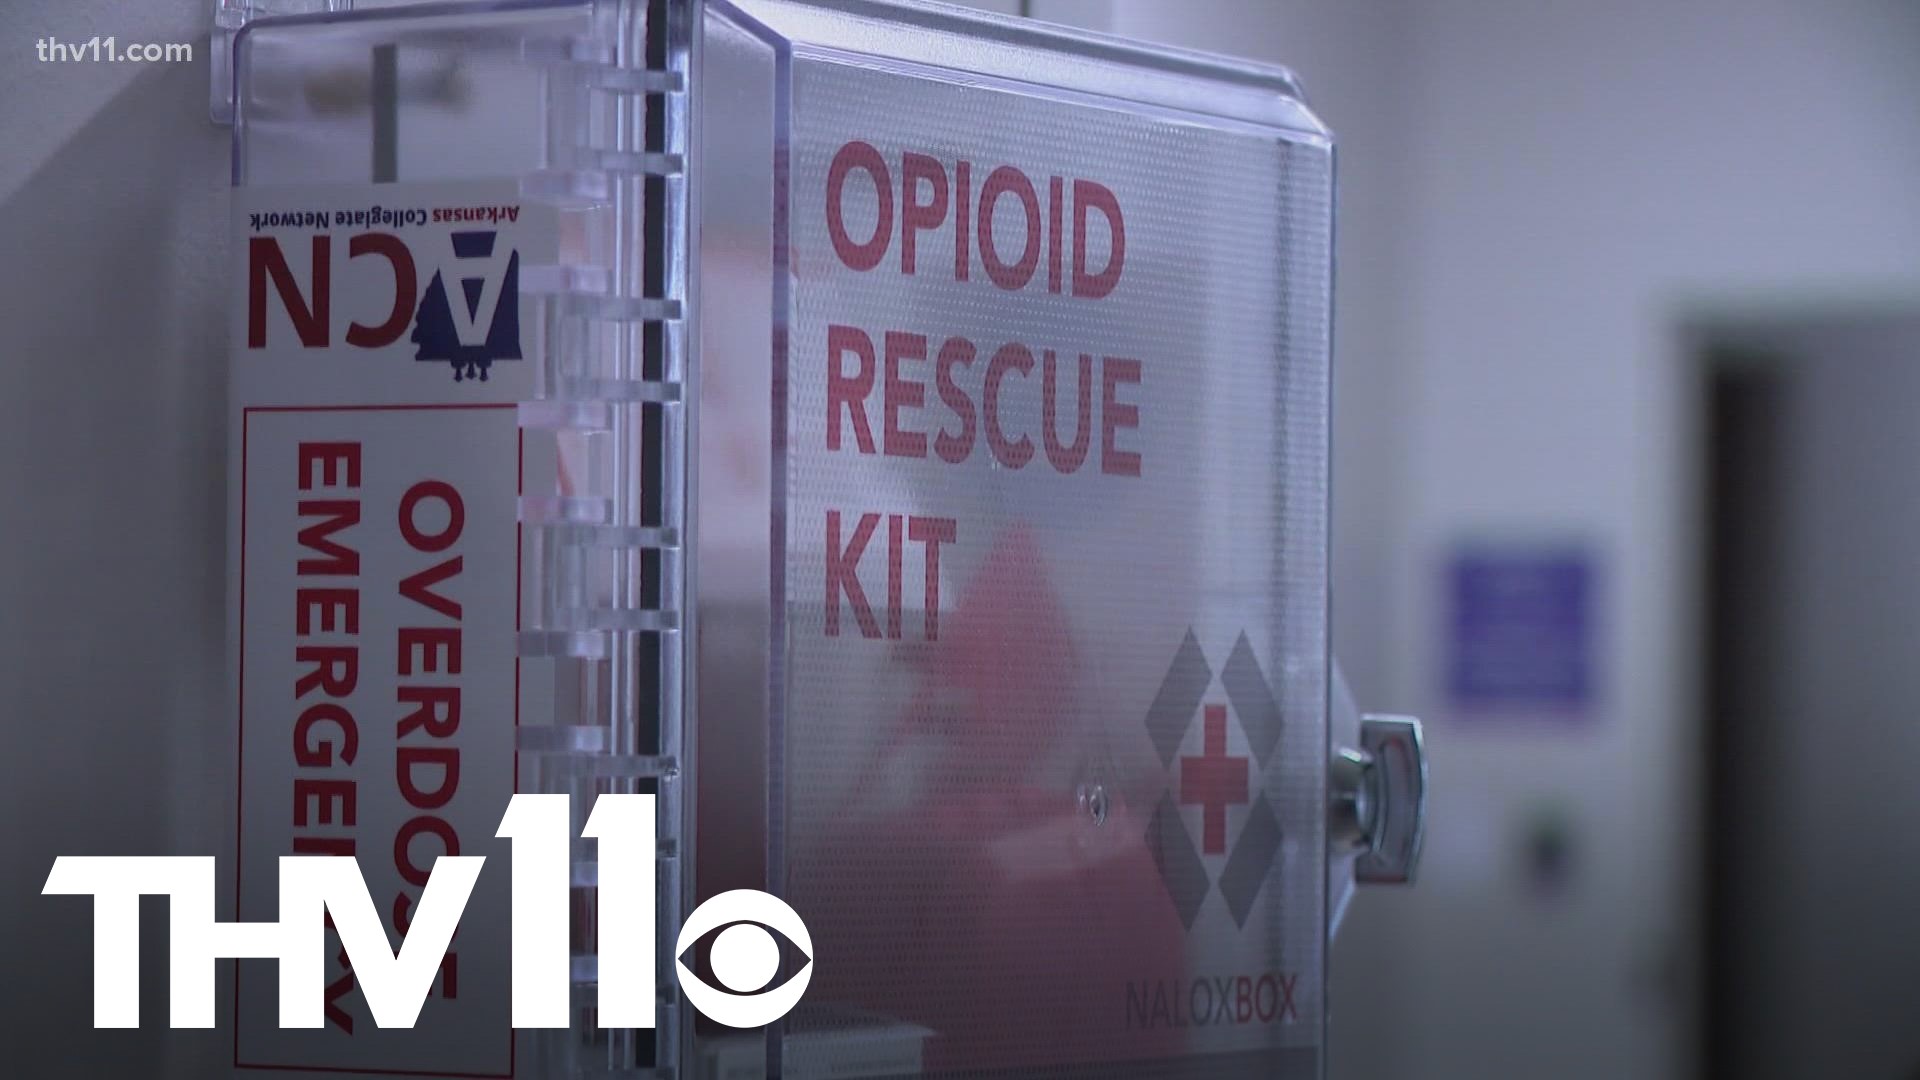 The University of Central Arkansas has become the first college in Arkansas to add emergency opioid overdose reversal kits across its campus.